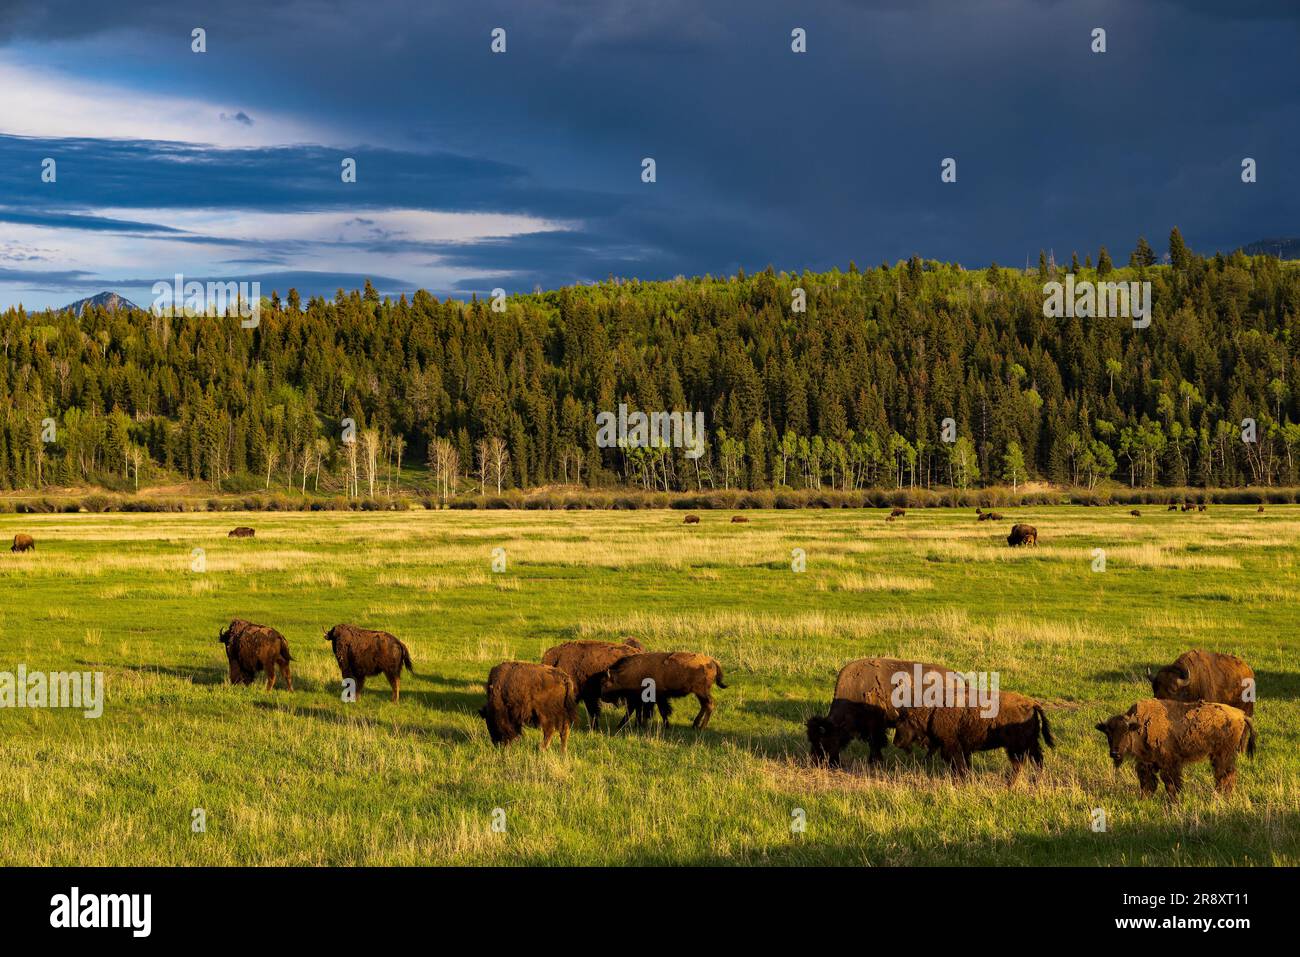 A late afternoon view of American Bison (Bison bison) grazing in the Elk Ranch Flats area of Grand Teton National Park, Teton County, Wyoming, USA. Stock Photo